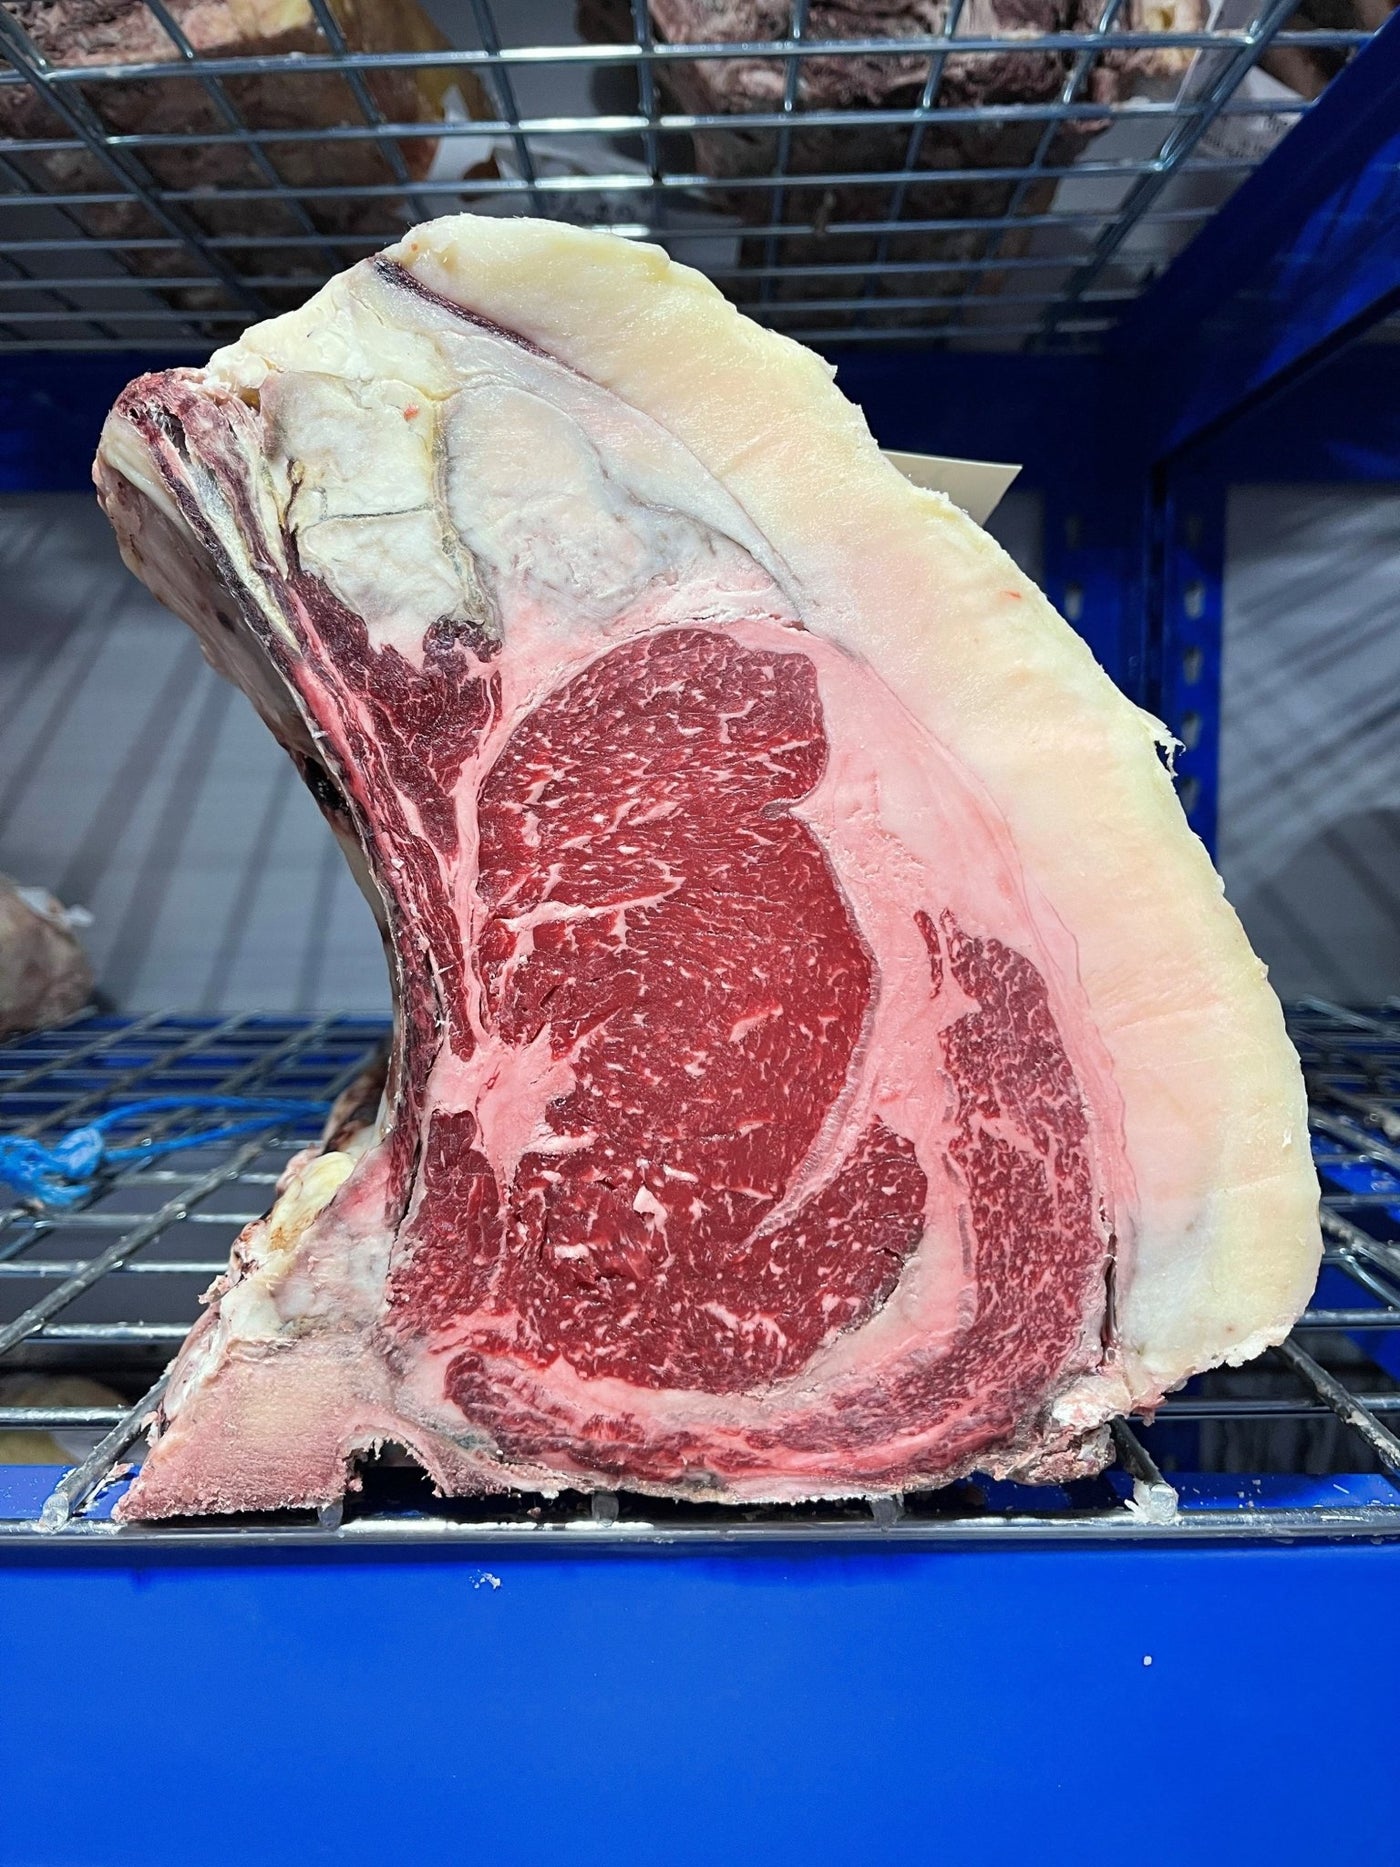 100 Day Dry-Aged Irish Angus - 7 Years Old - Thomas Joseph Butchery - Ethical Dry-Aged Meat The Best Steak UK Thomas Joseph Butchery